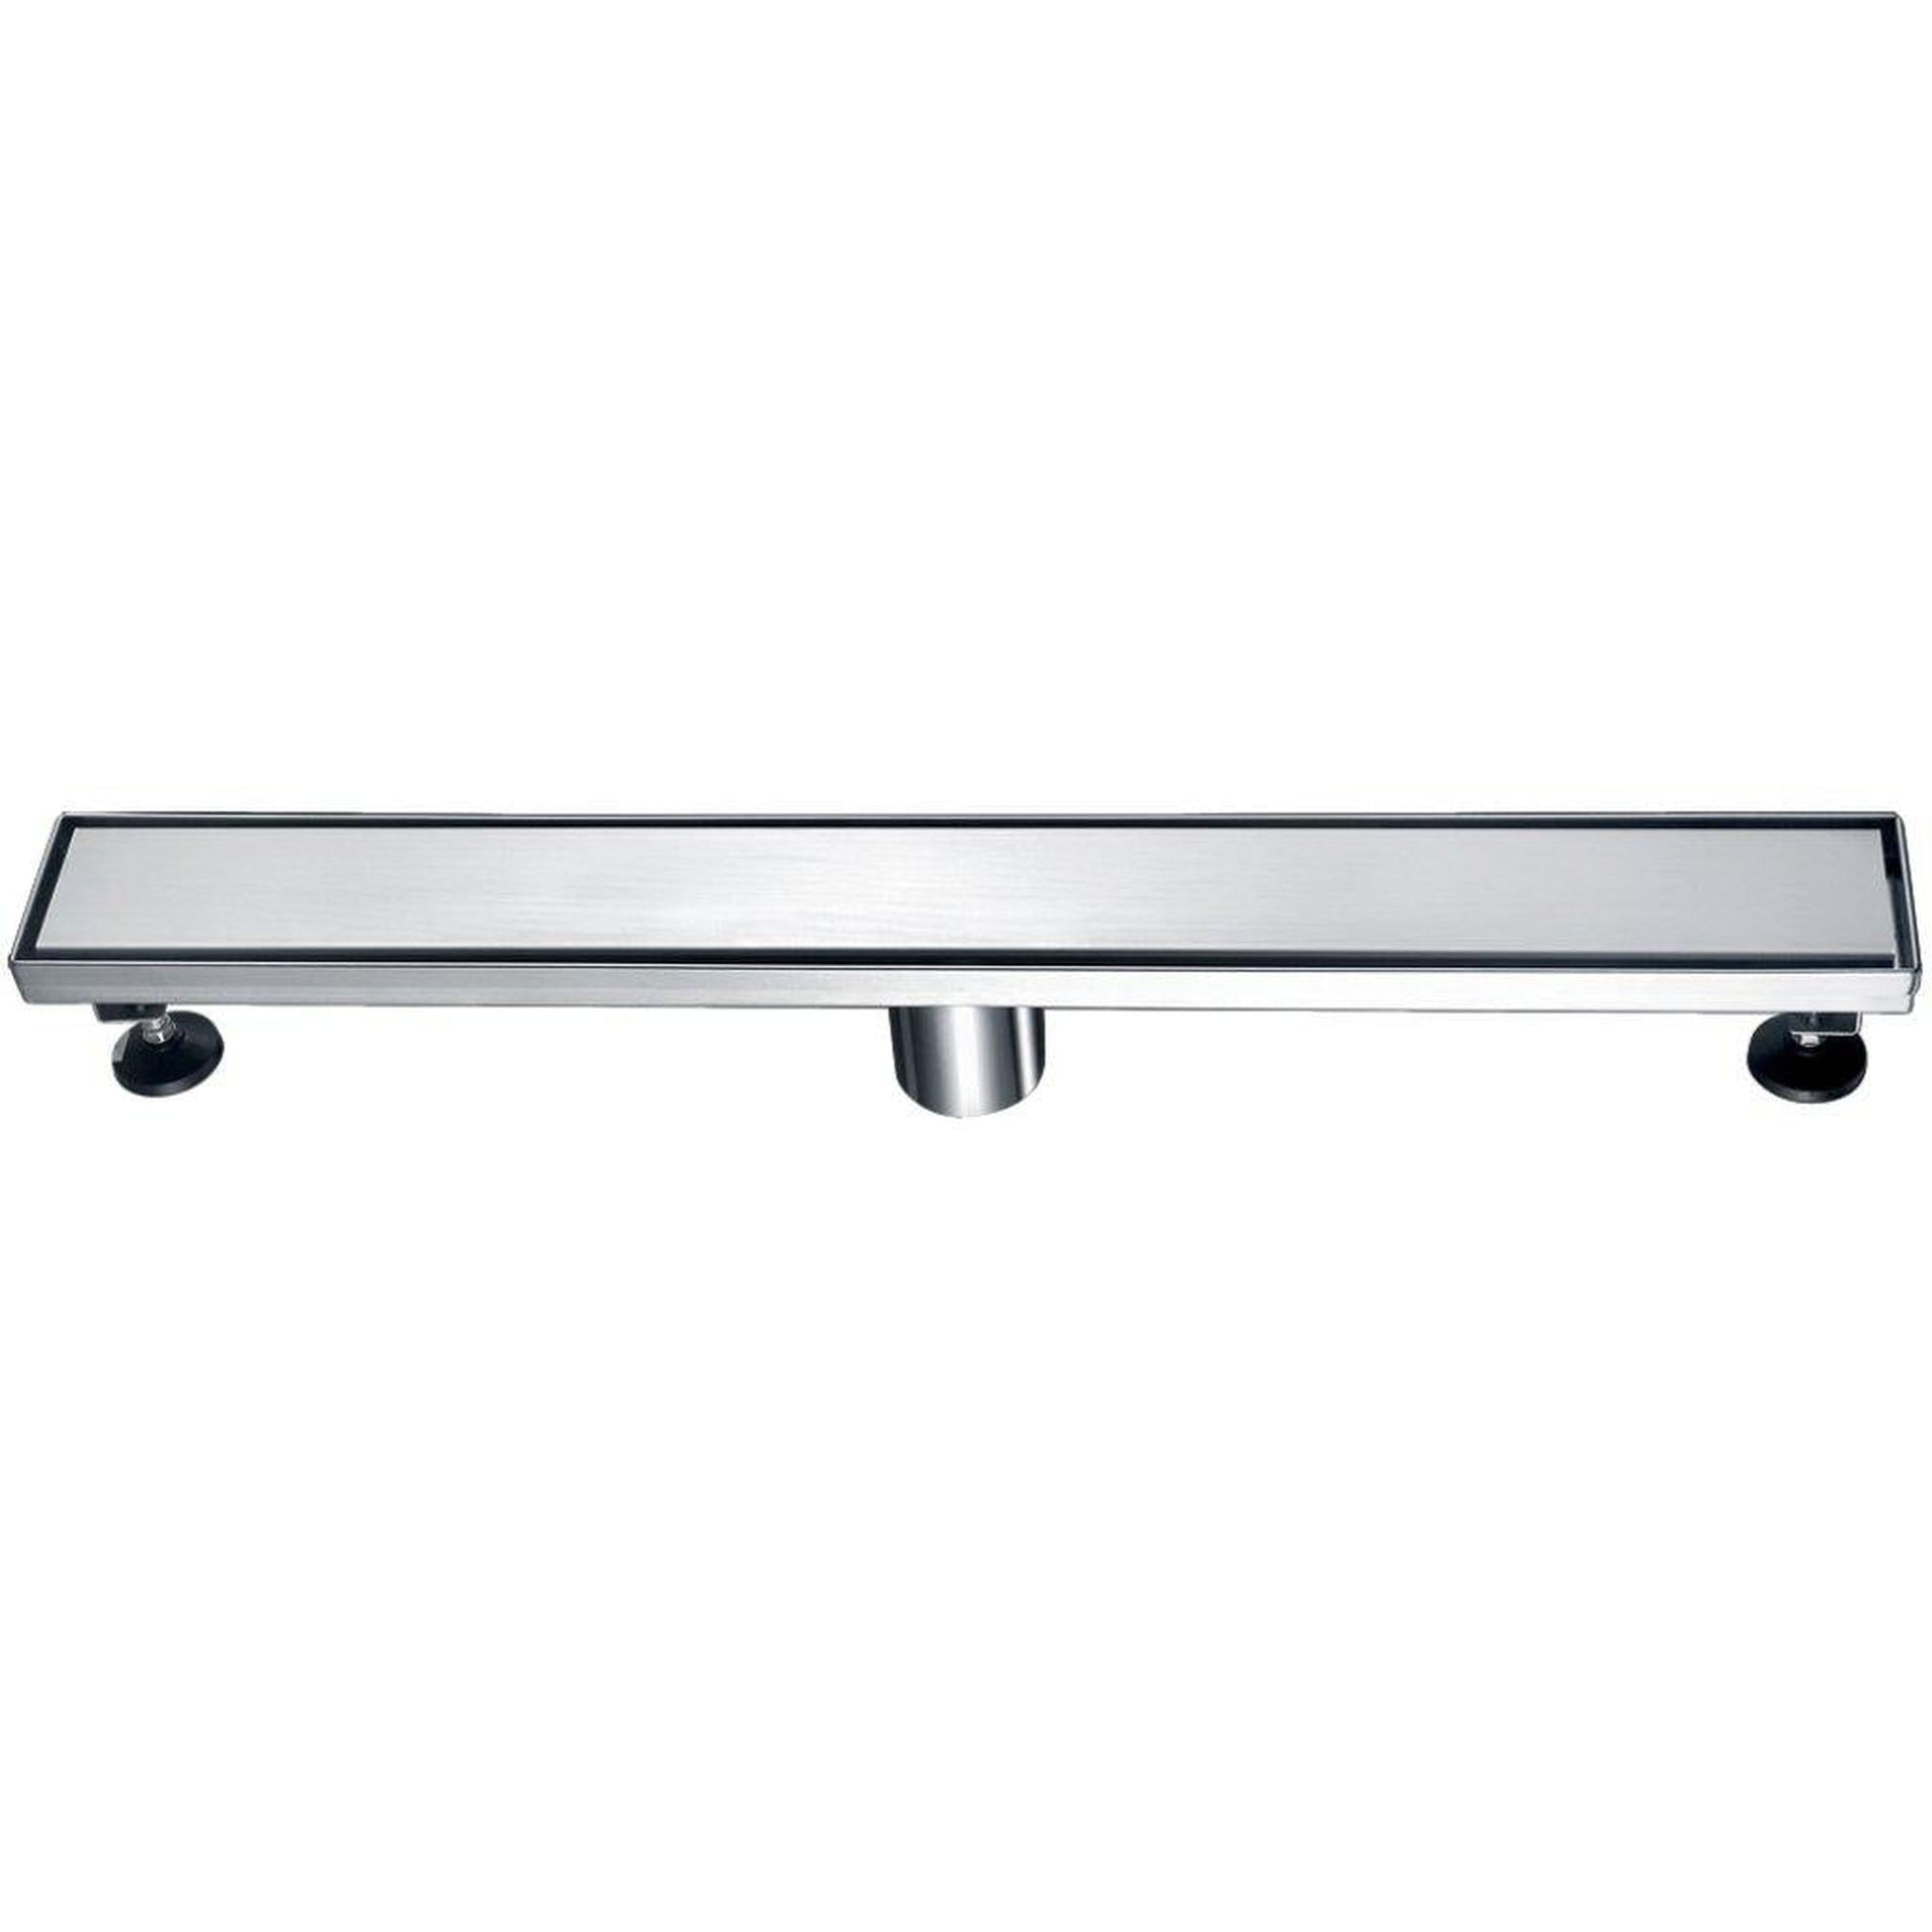 ALFI Brand ABLD24B-PSS 24" Polished Stainless Steel Rectangle Linear Shower Drain With Solid Cover